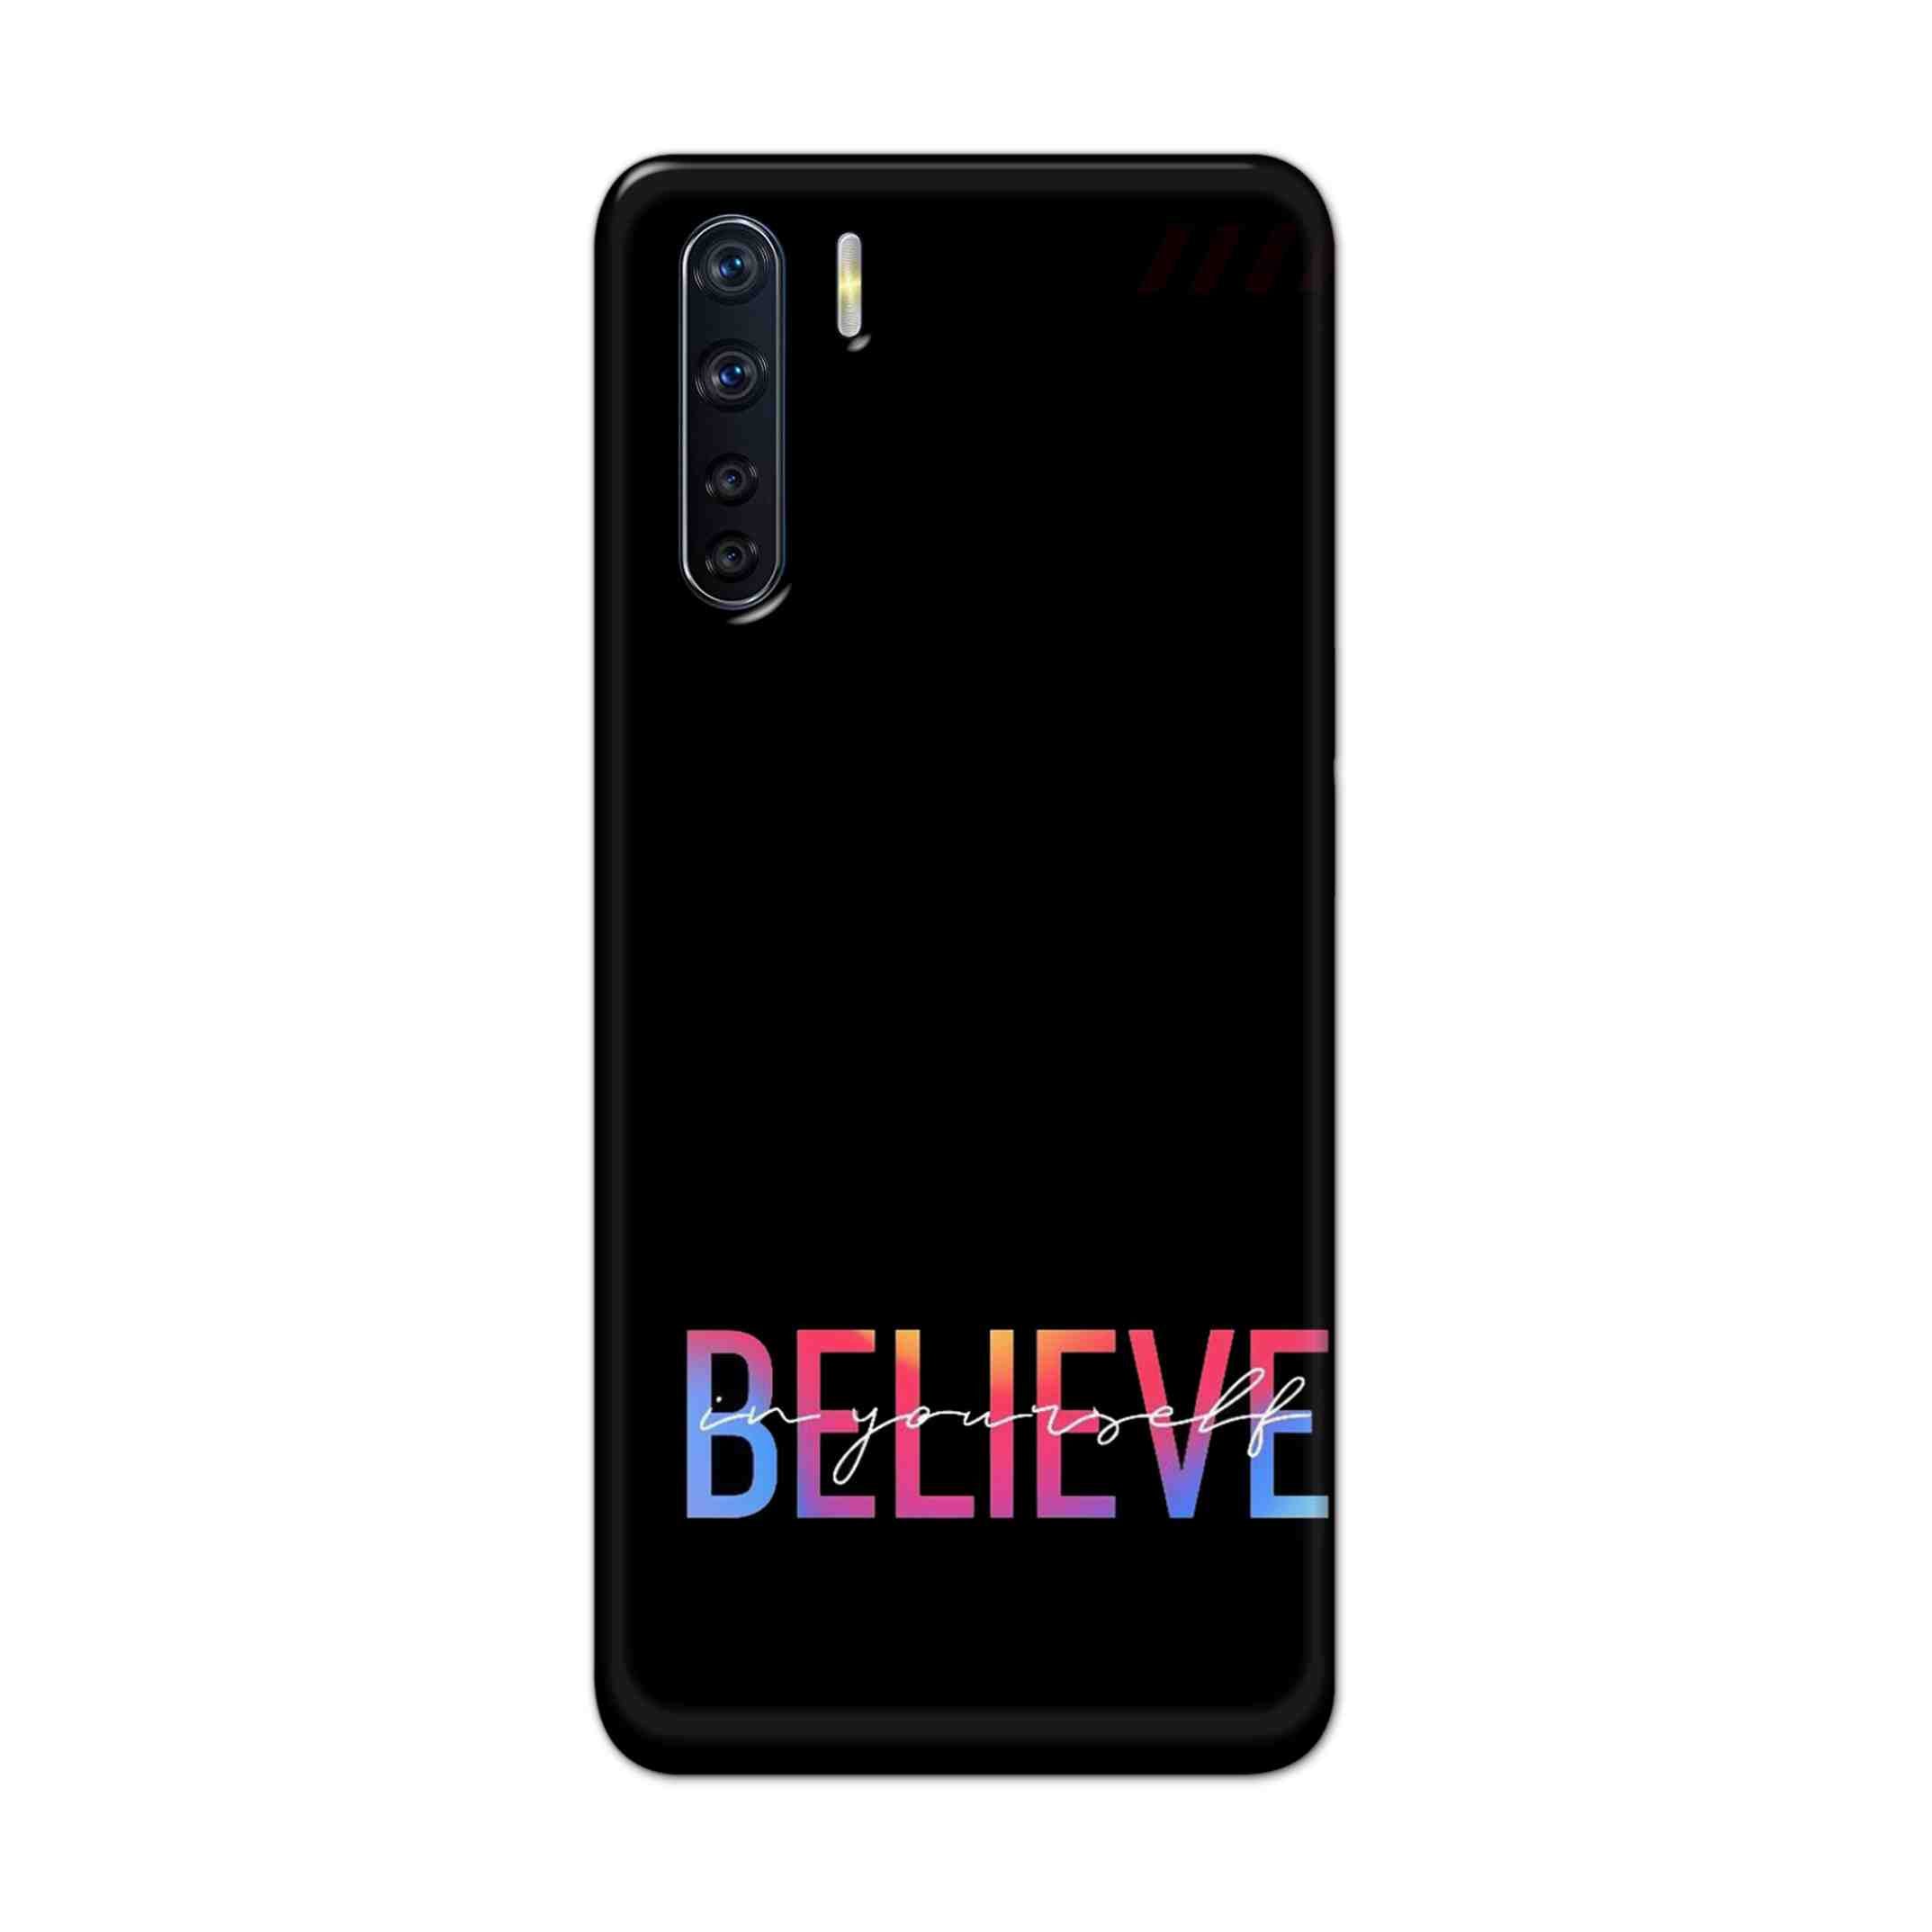 Buy Believe Hard Back Mobile Phone Case Cover For OPPO F15 Online